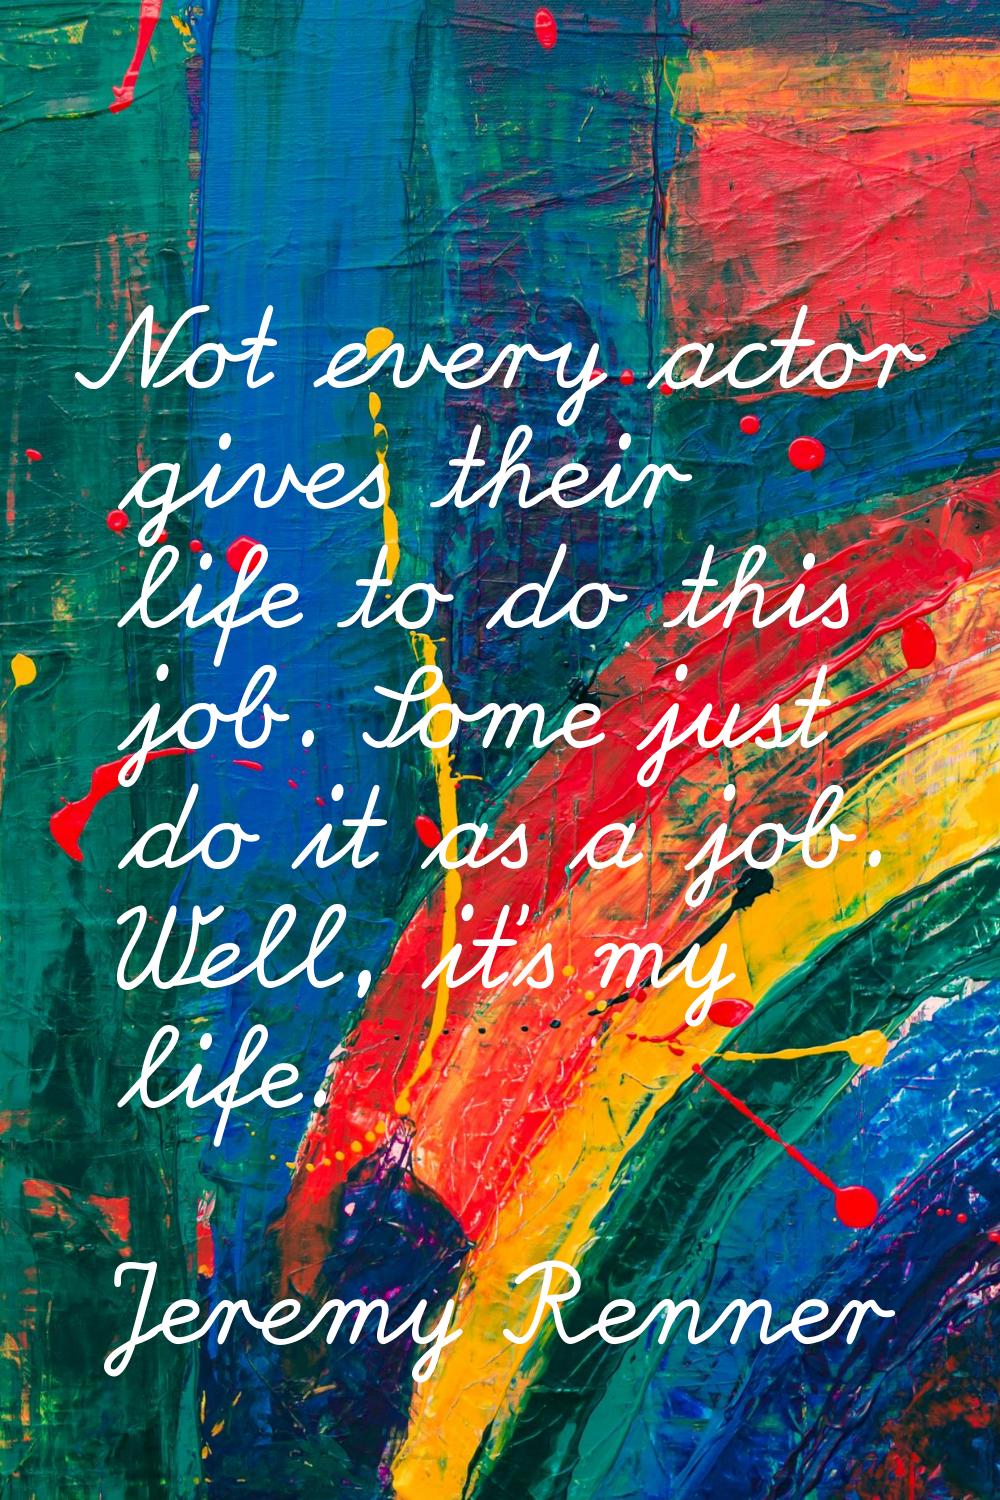 Not every actor gives their life to do this job. Some just do it as a job. Well, it's my life.